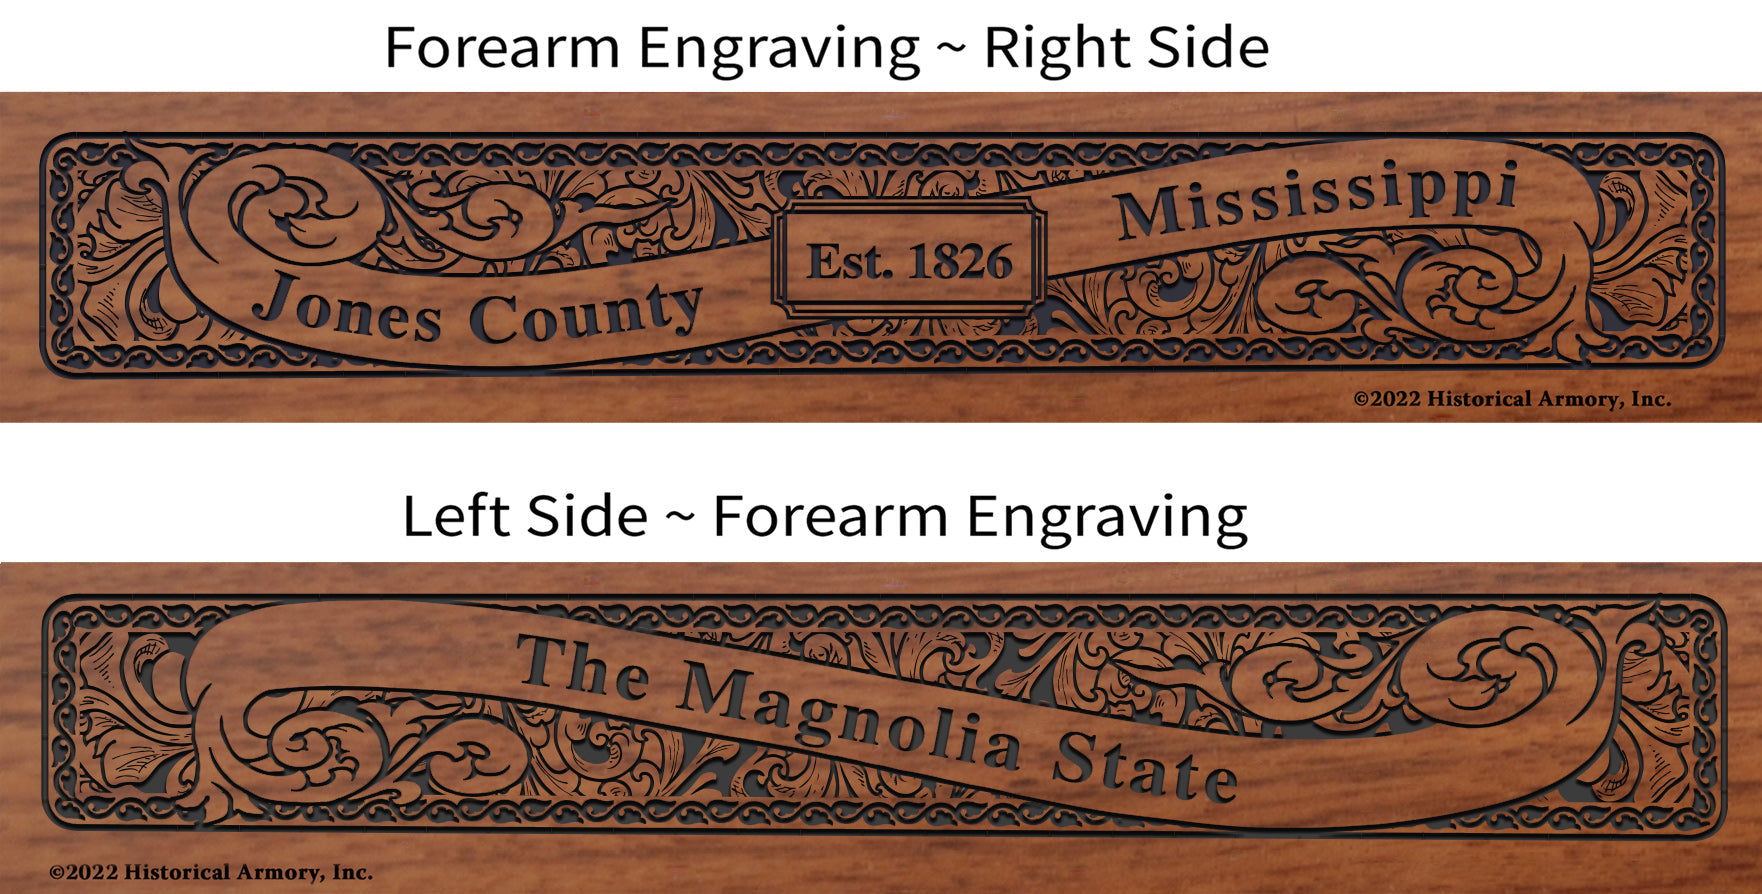 Jones County Mississippi Engraved Rifle Forearm